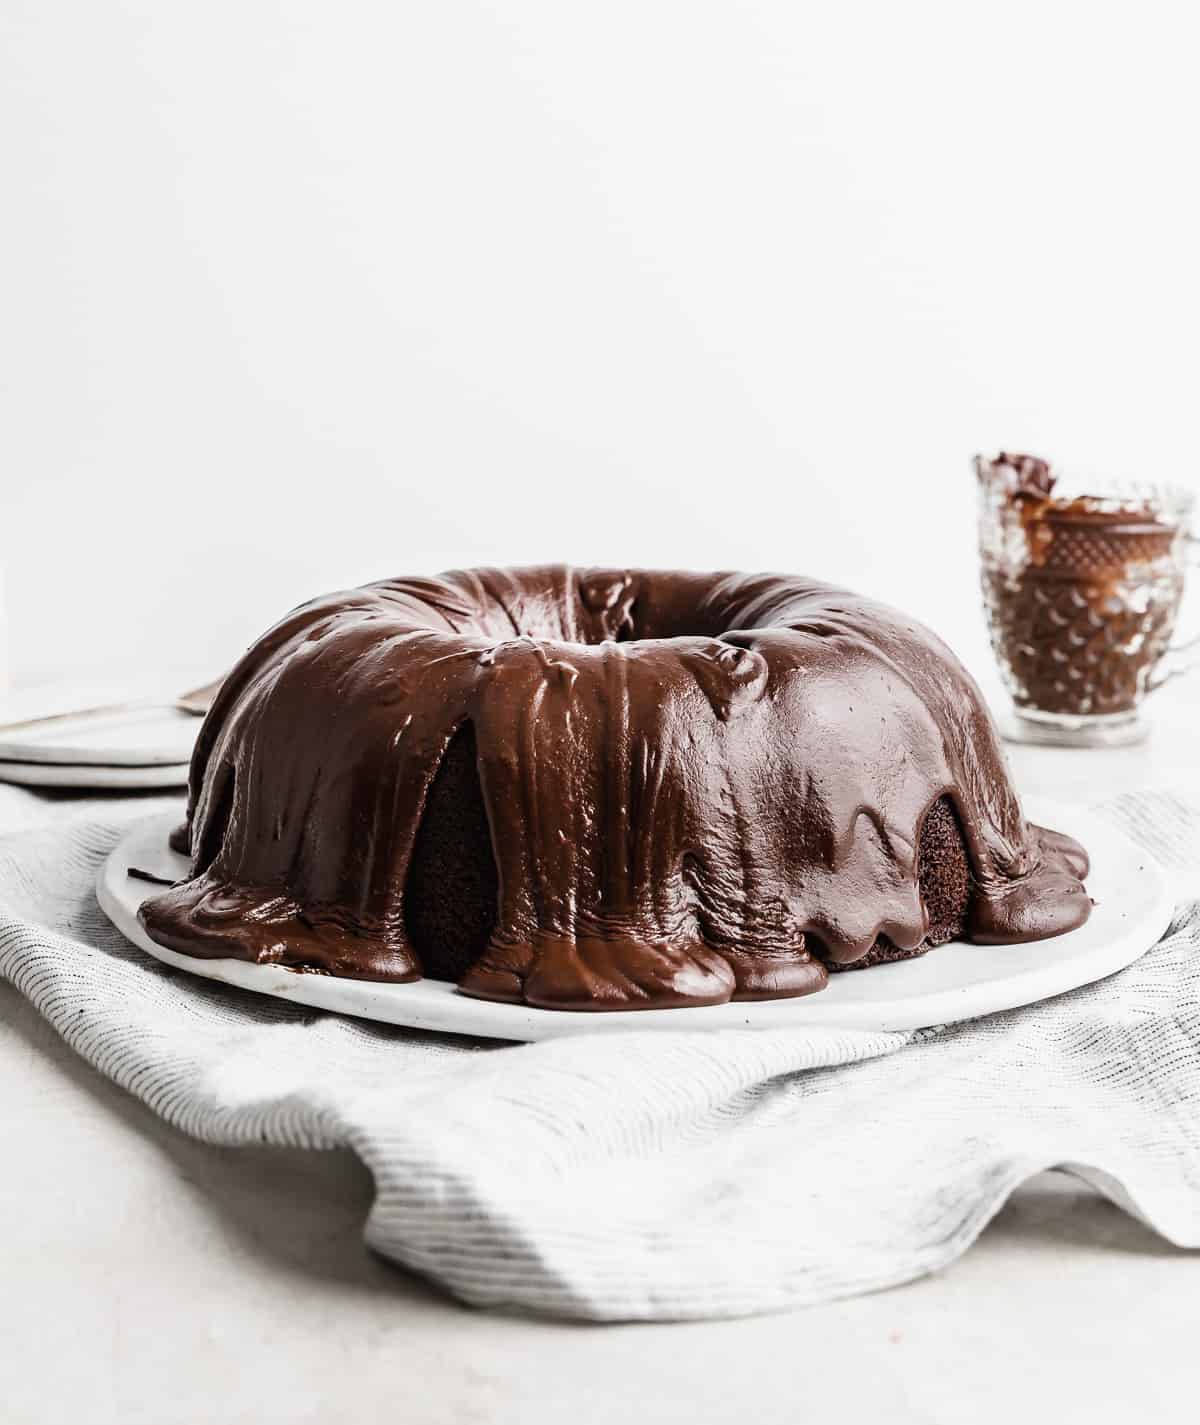 A chocolate frosting covered chocolate Bundt Cake on a white plate against a white background.